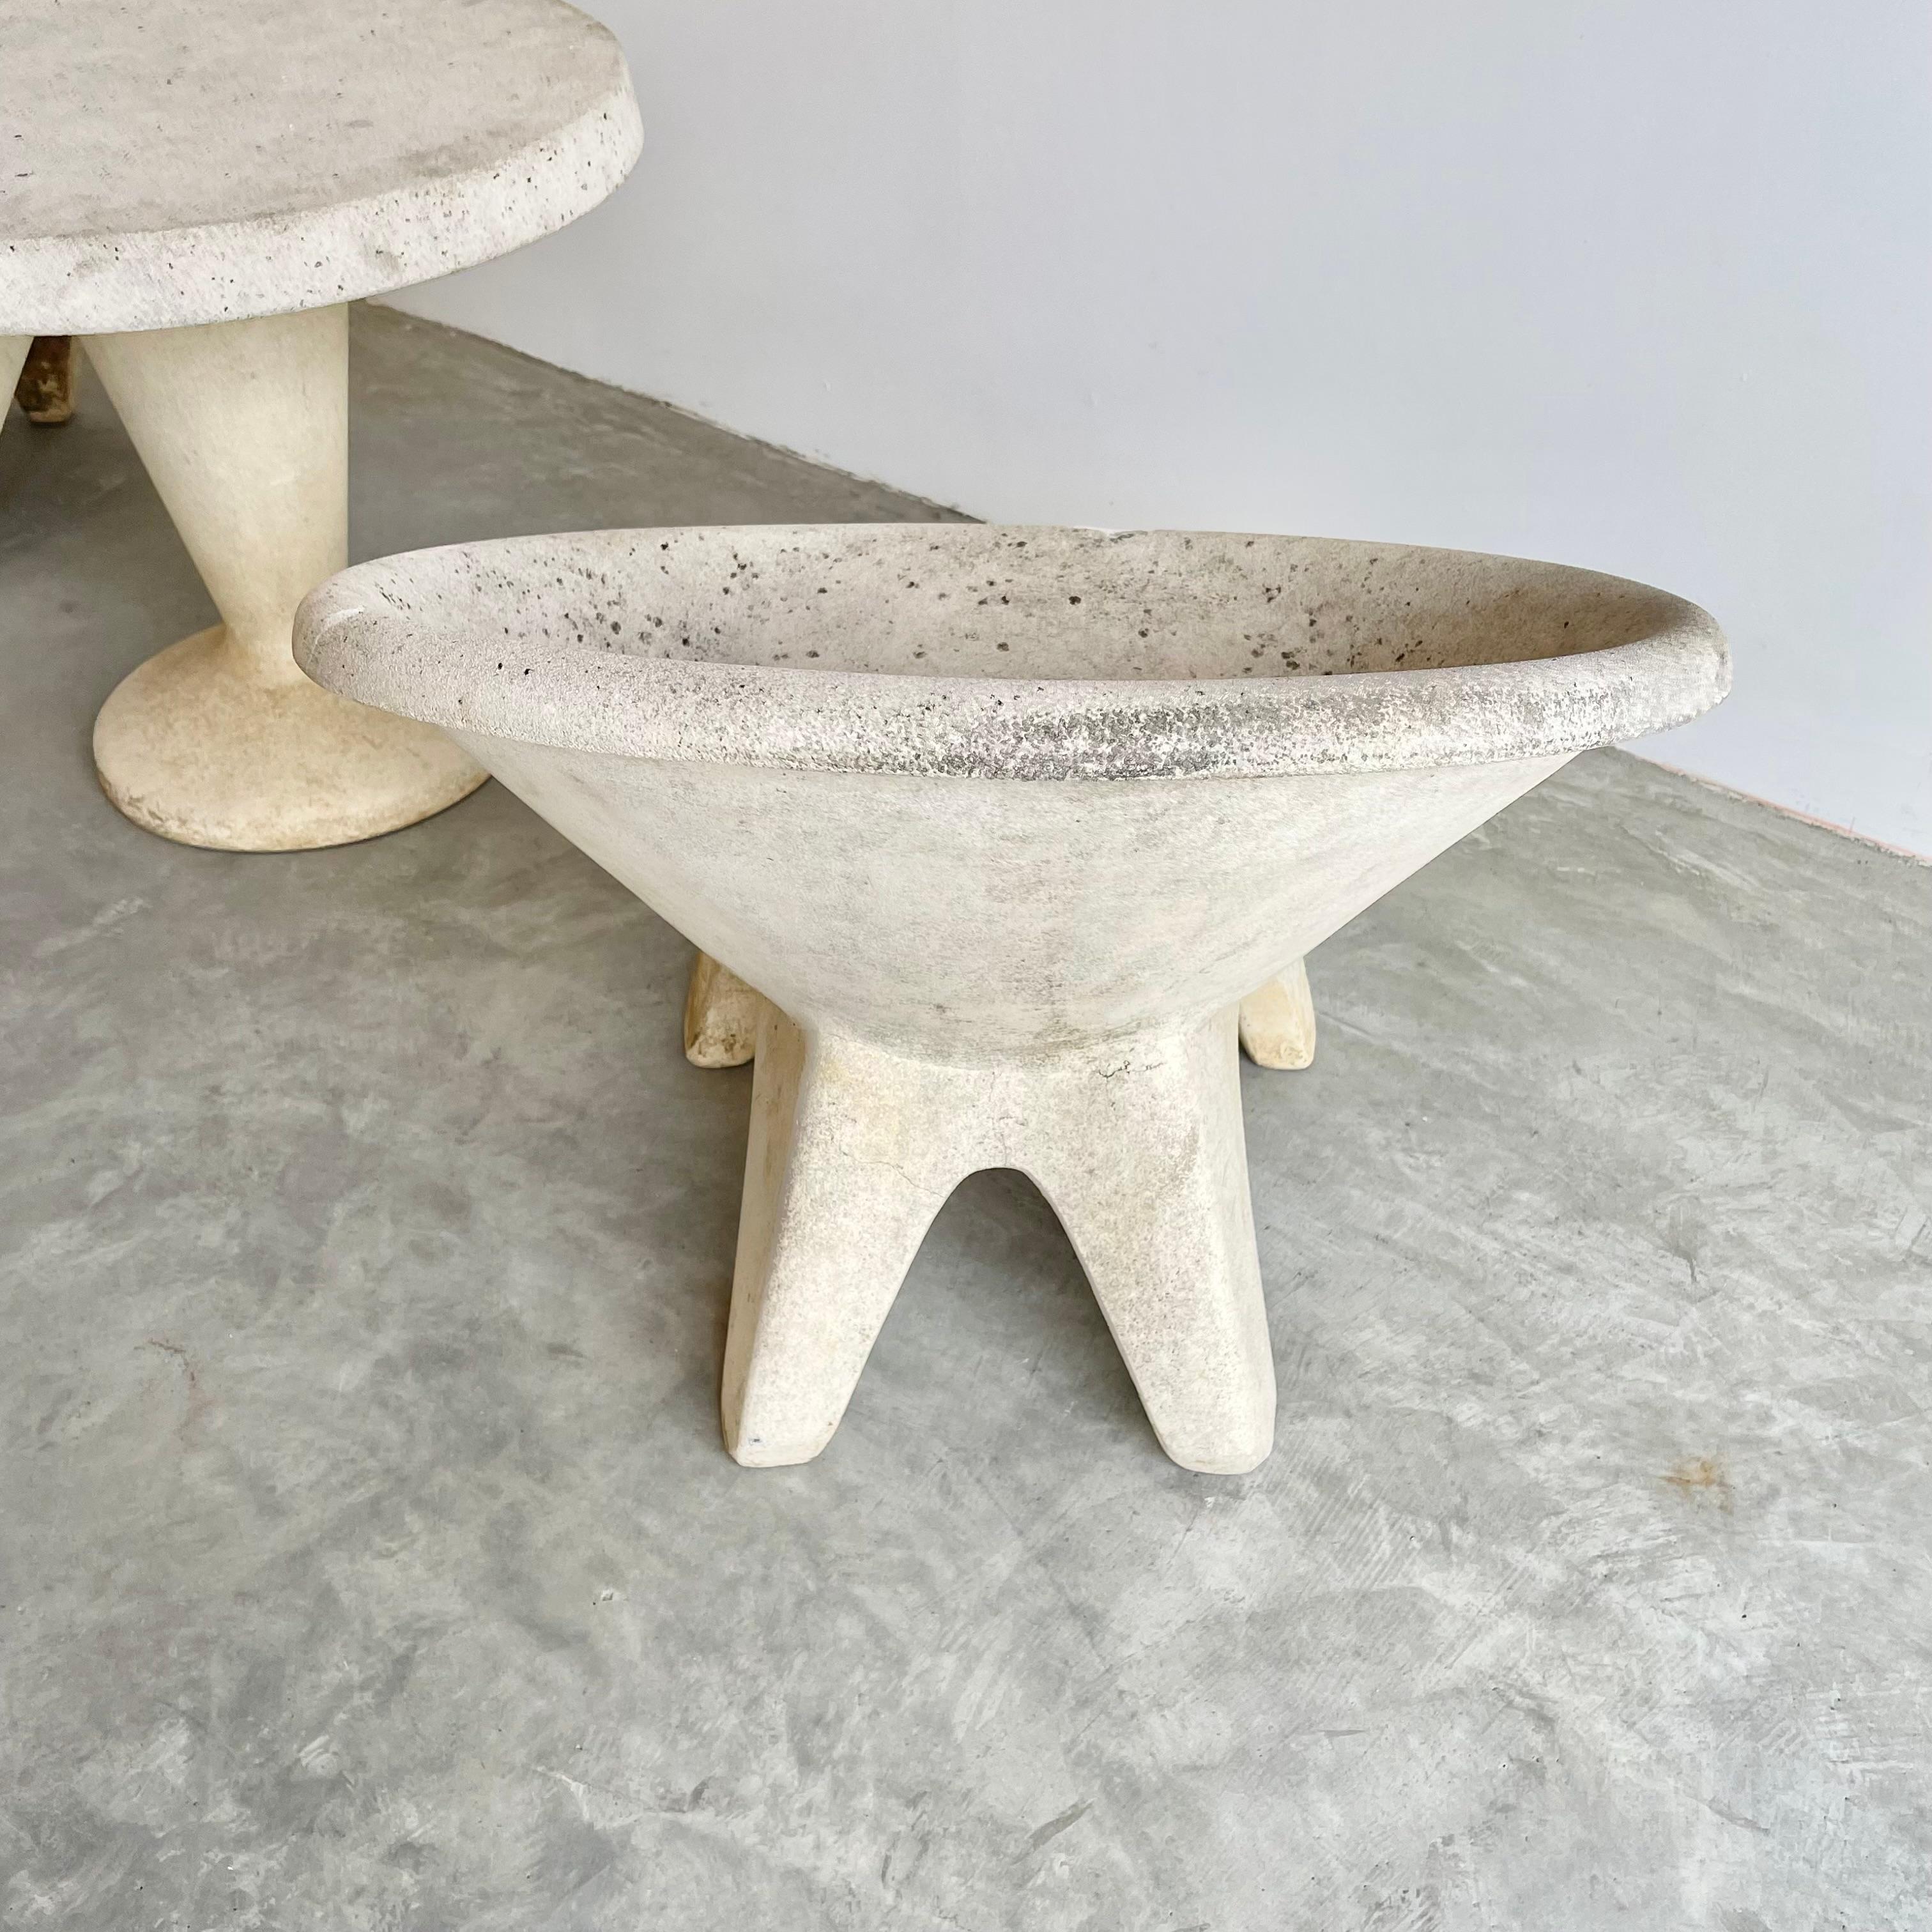 Sculptural Concrete Chairs and Table, 1960s Switzerland 9